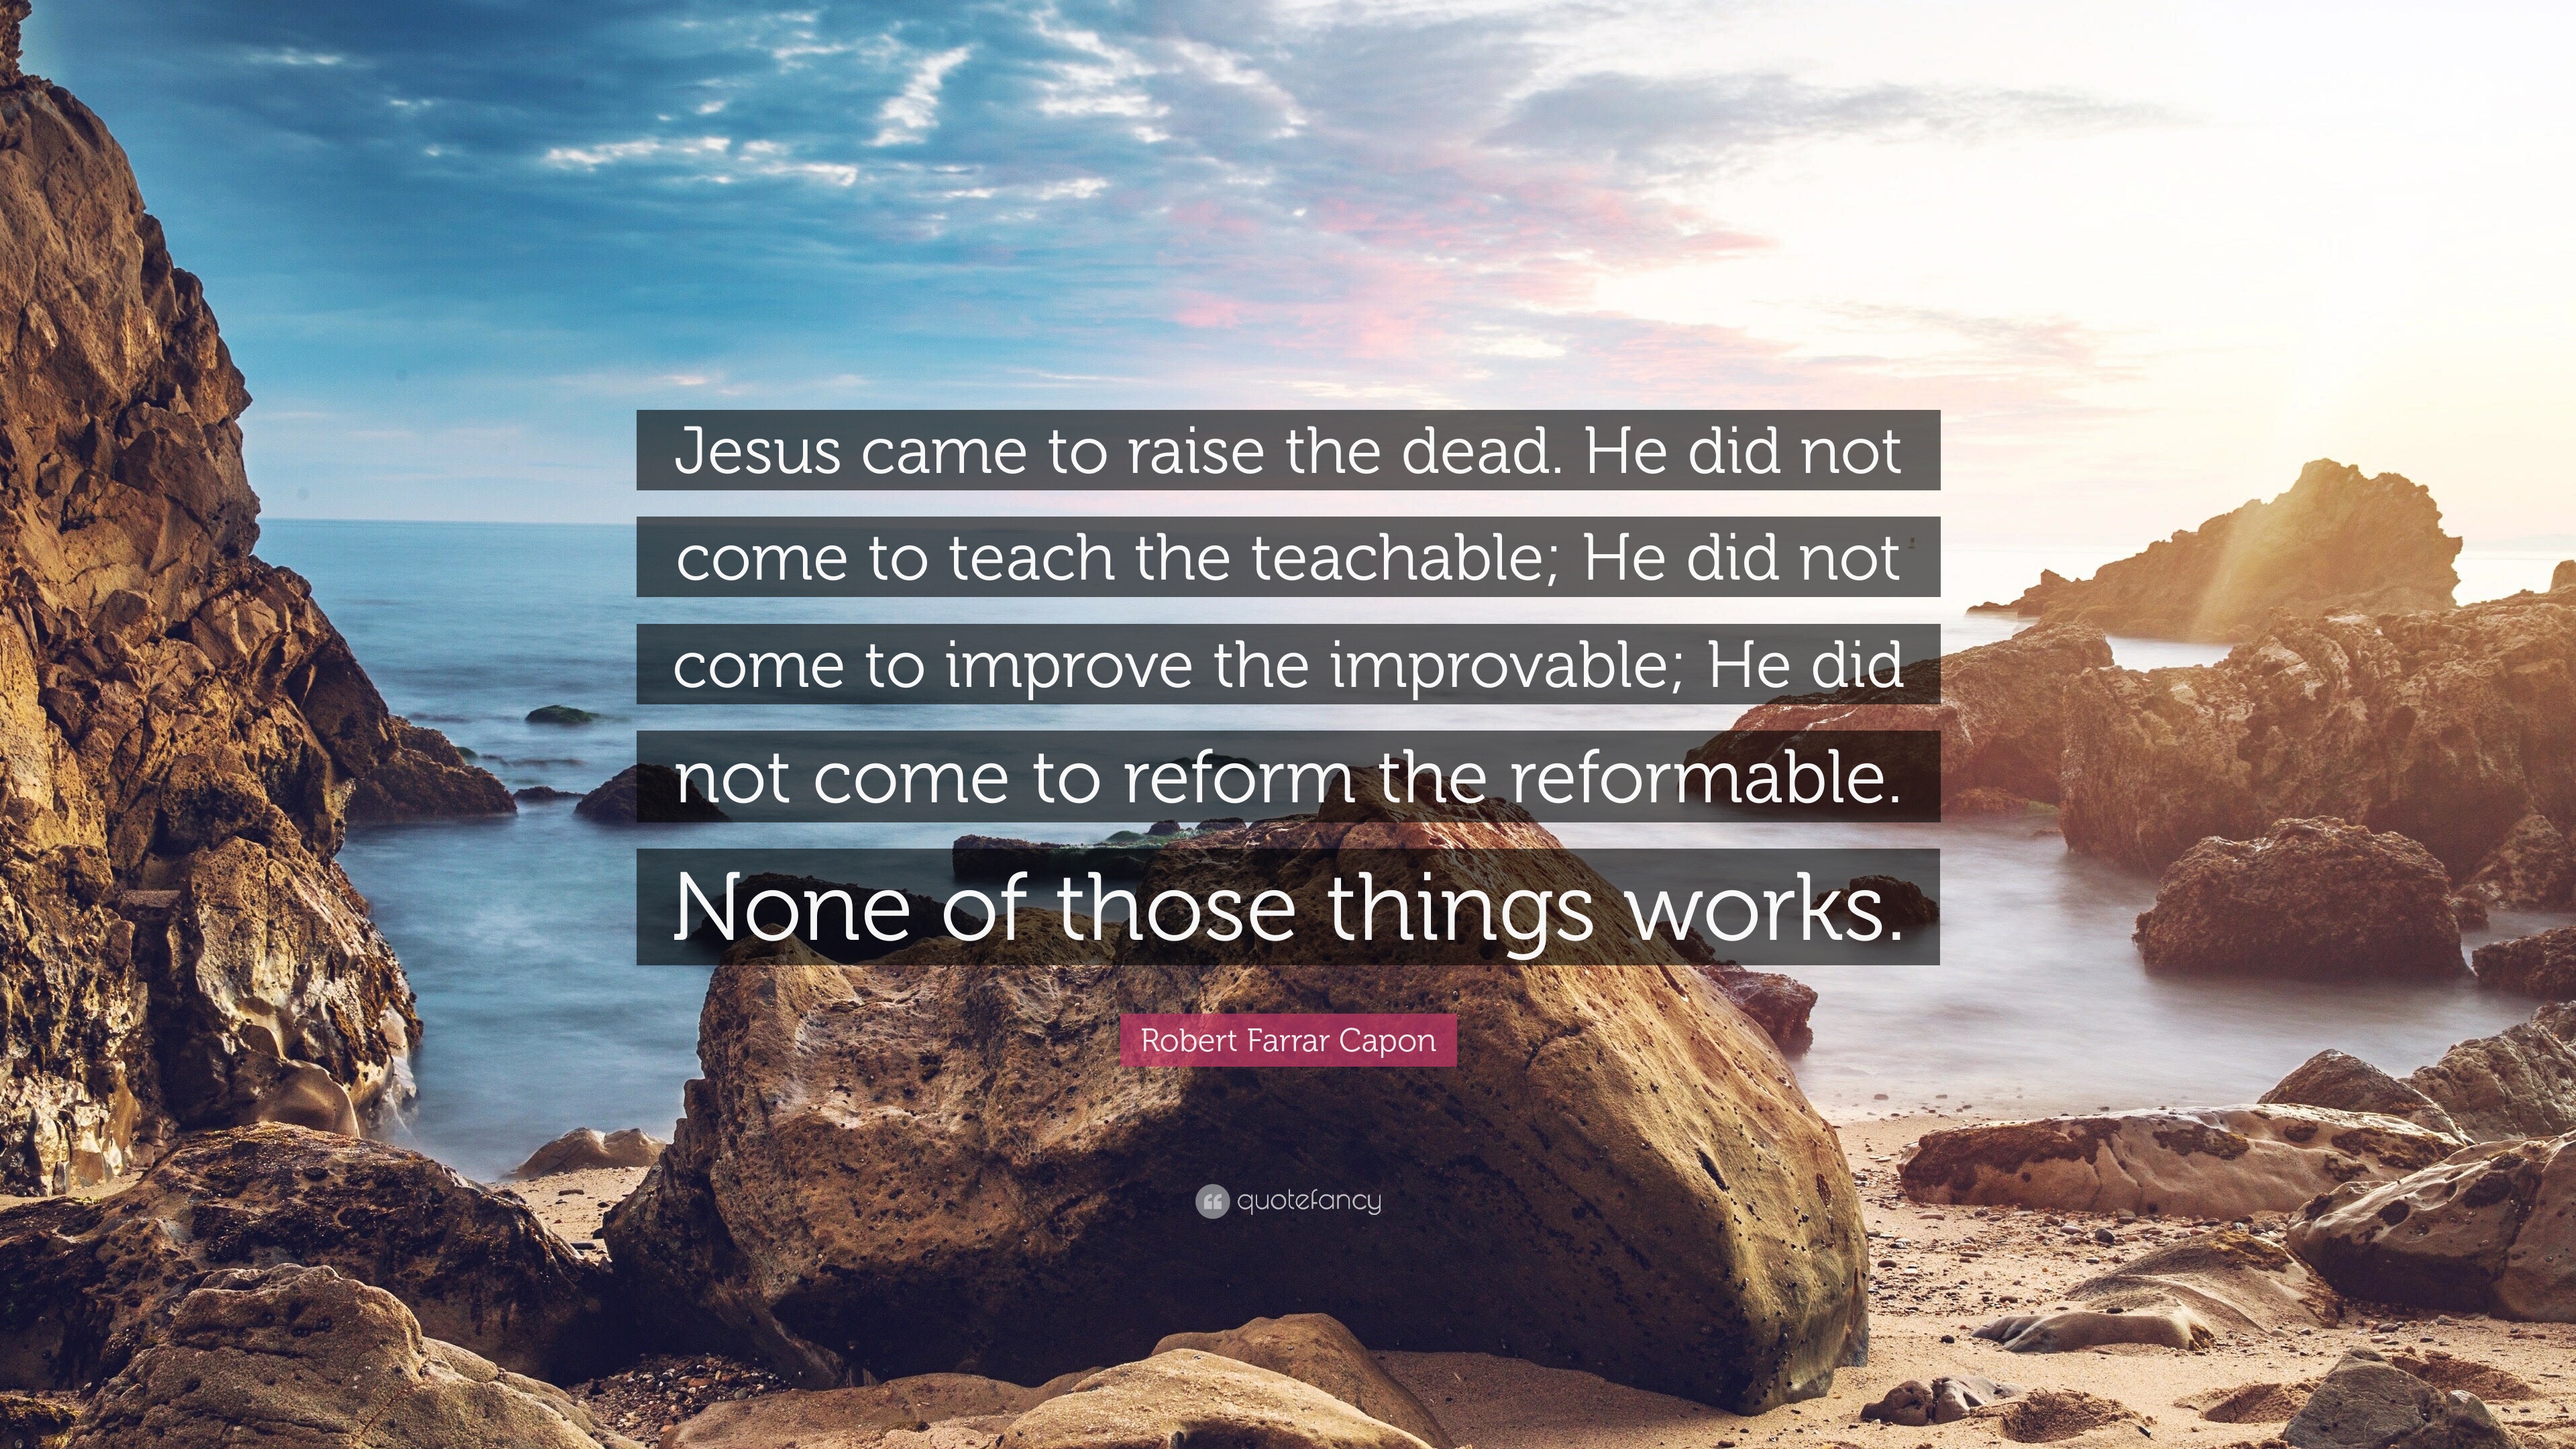 2803895-Robert-Farrar-Capon-Quote-Jesus-came-to-raise-the-dead-He-did-not.jpg